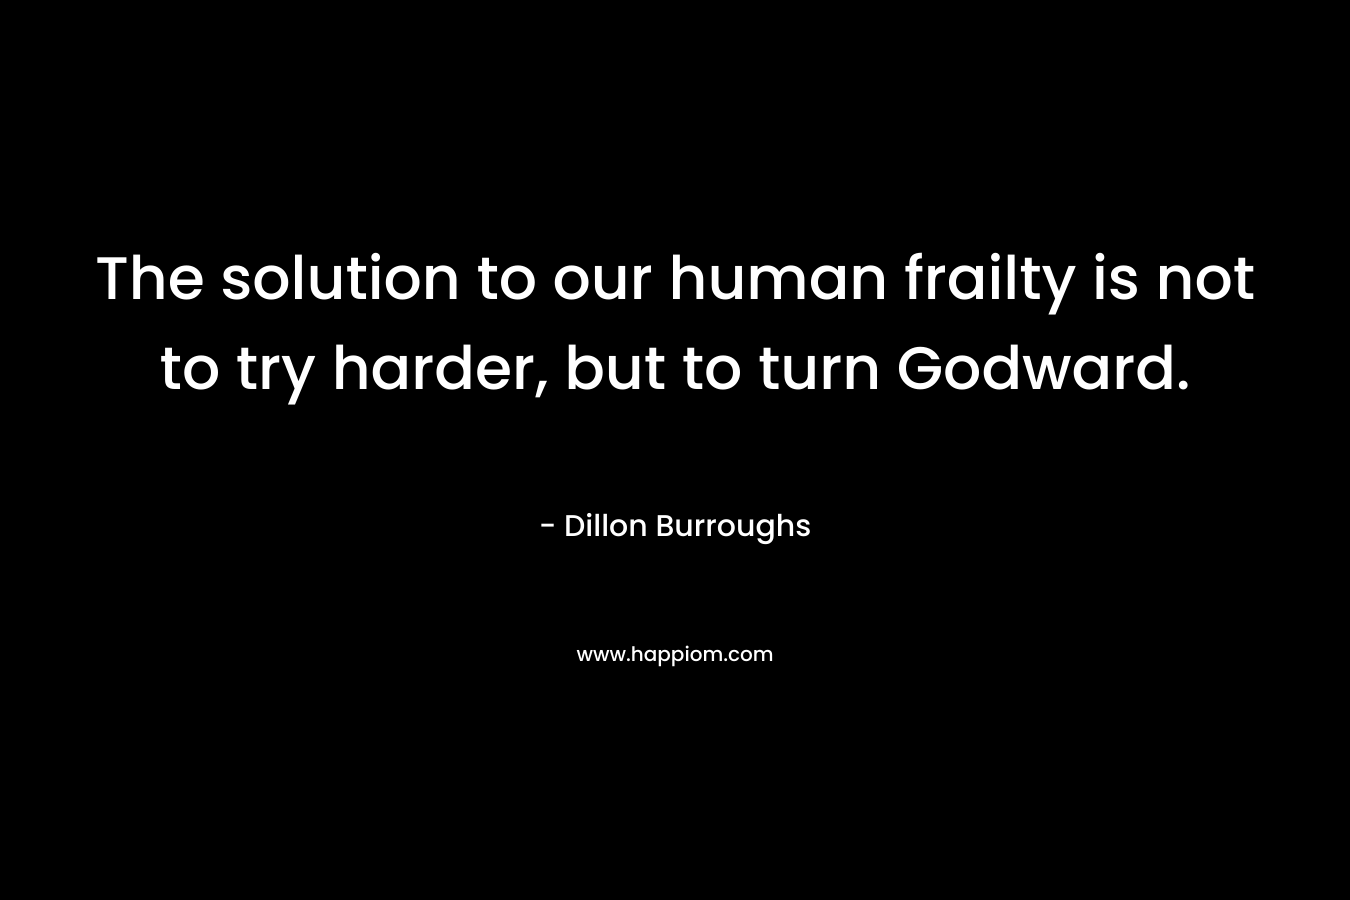 The solution to our human frailty is not to try harder, but to turn Godward. – Dillon Burroughs